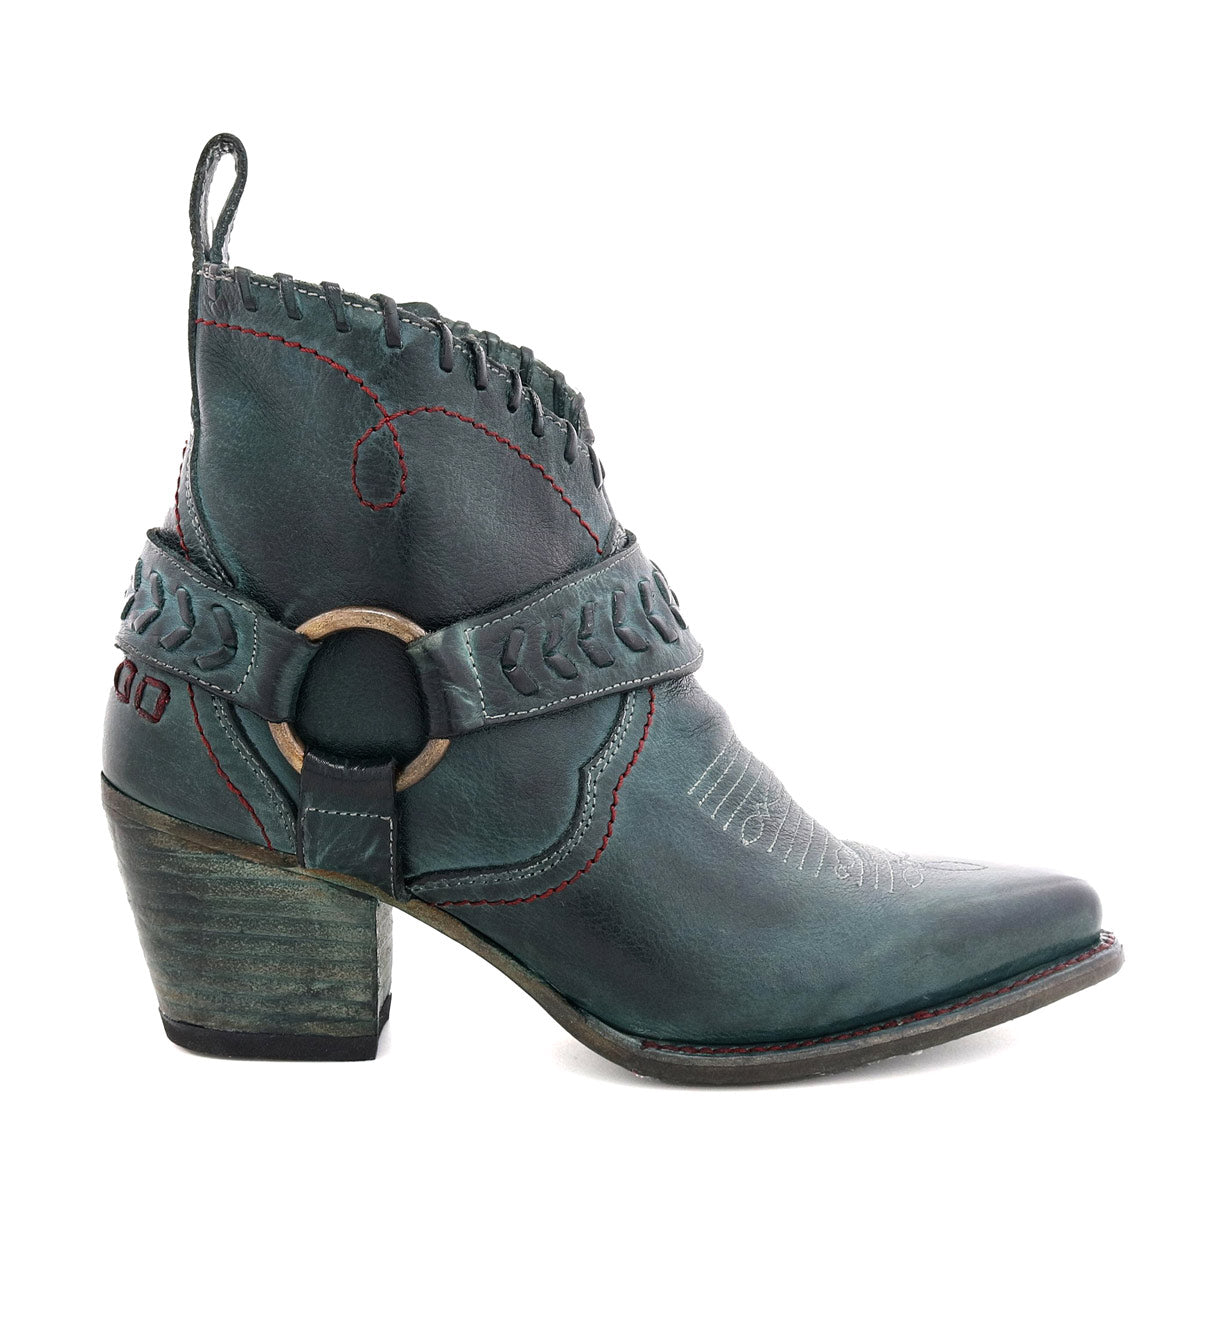 A women's green Tania cowboy boot with a buckle, by Bed Stu.